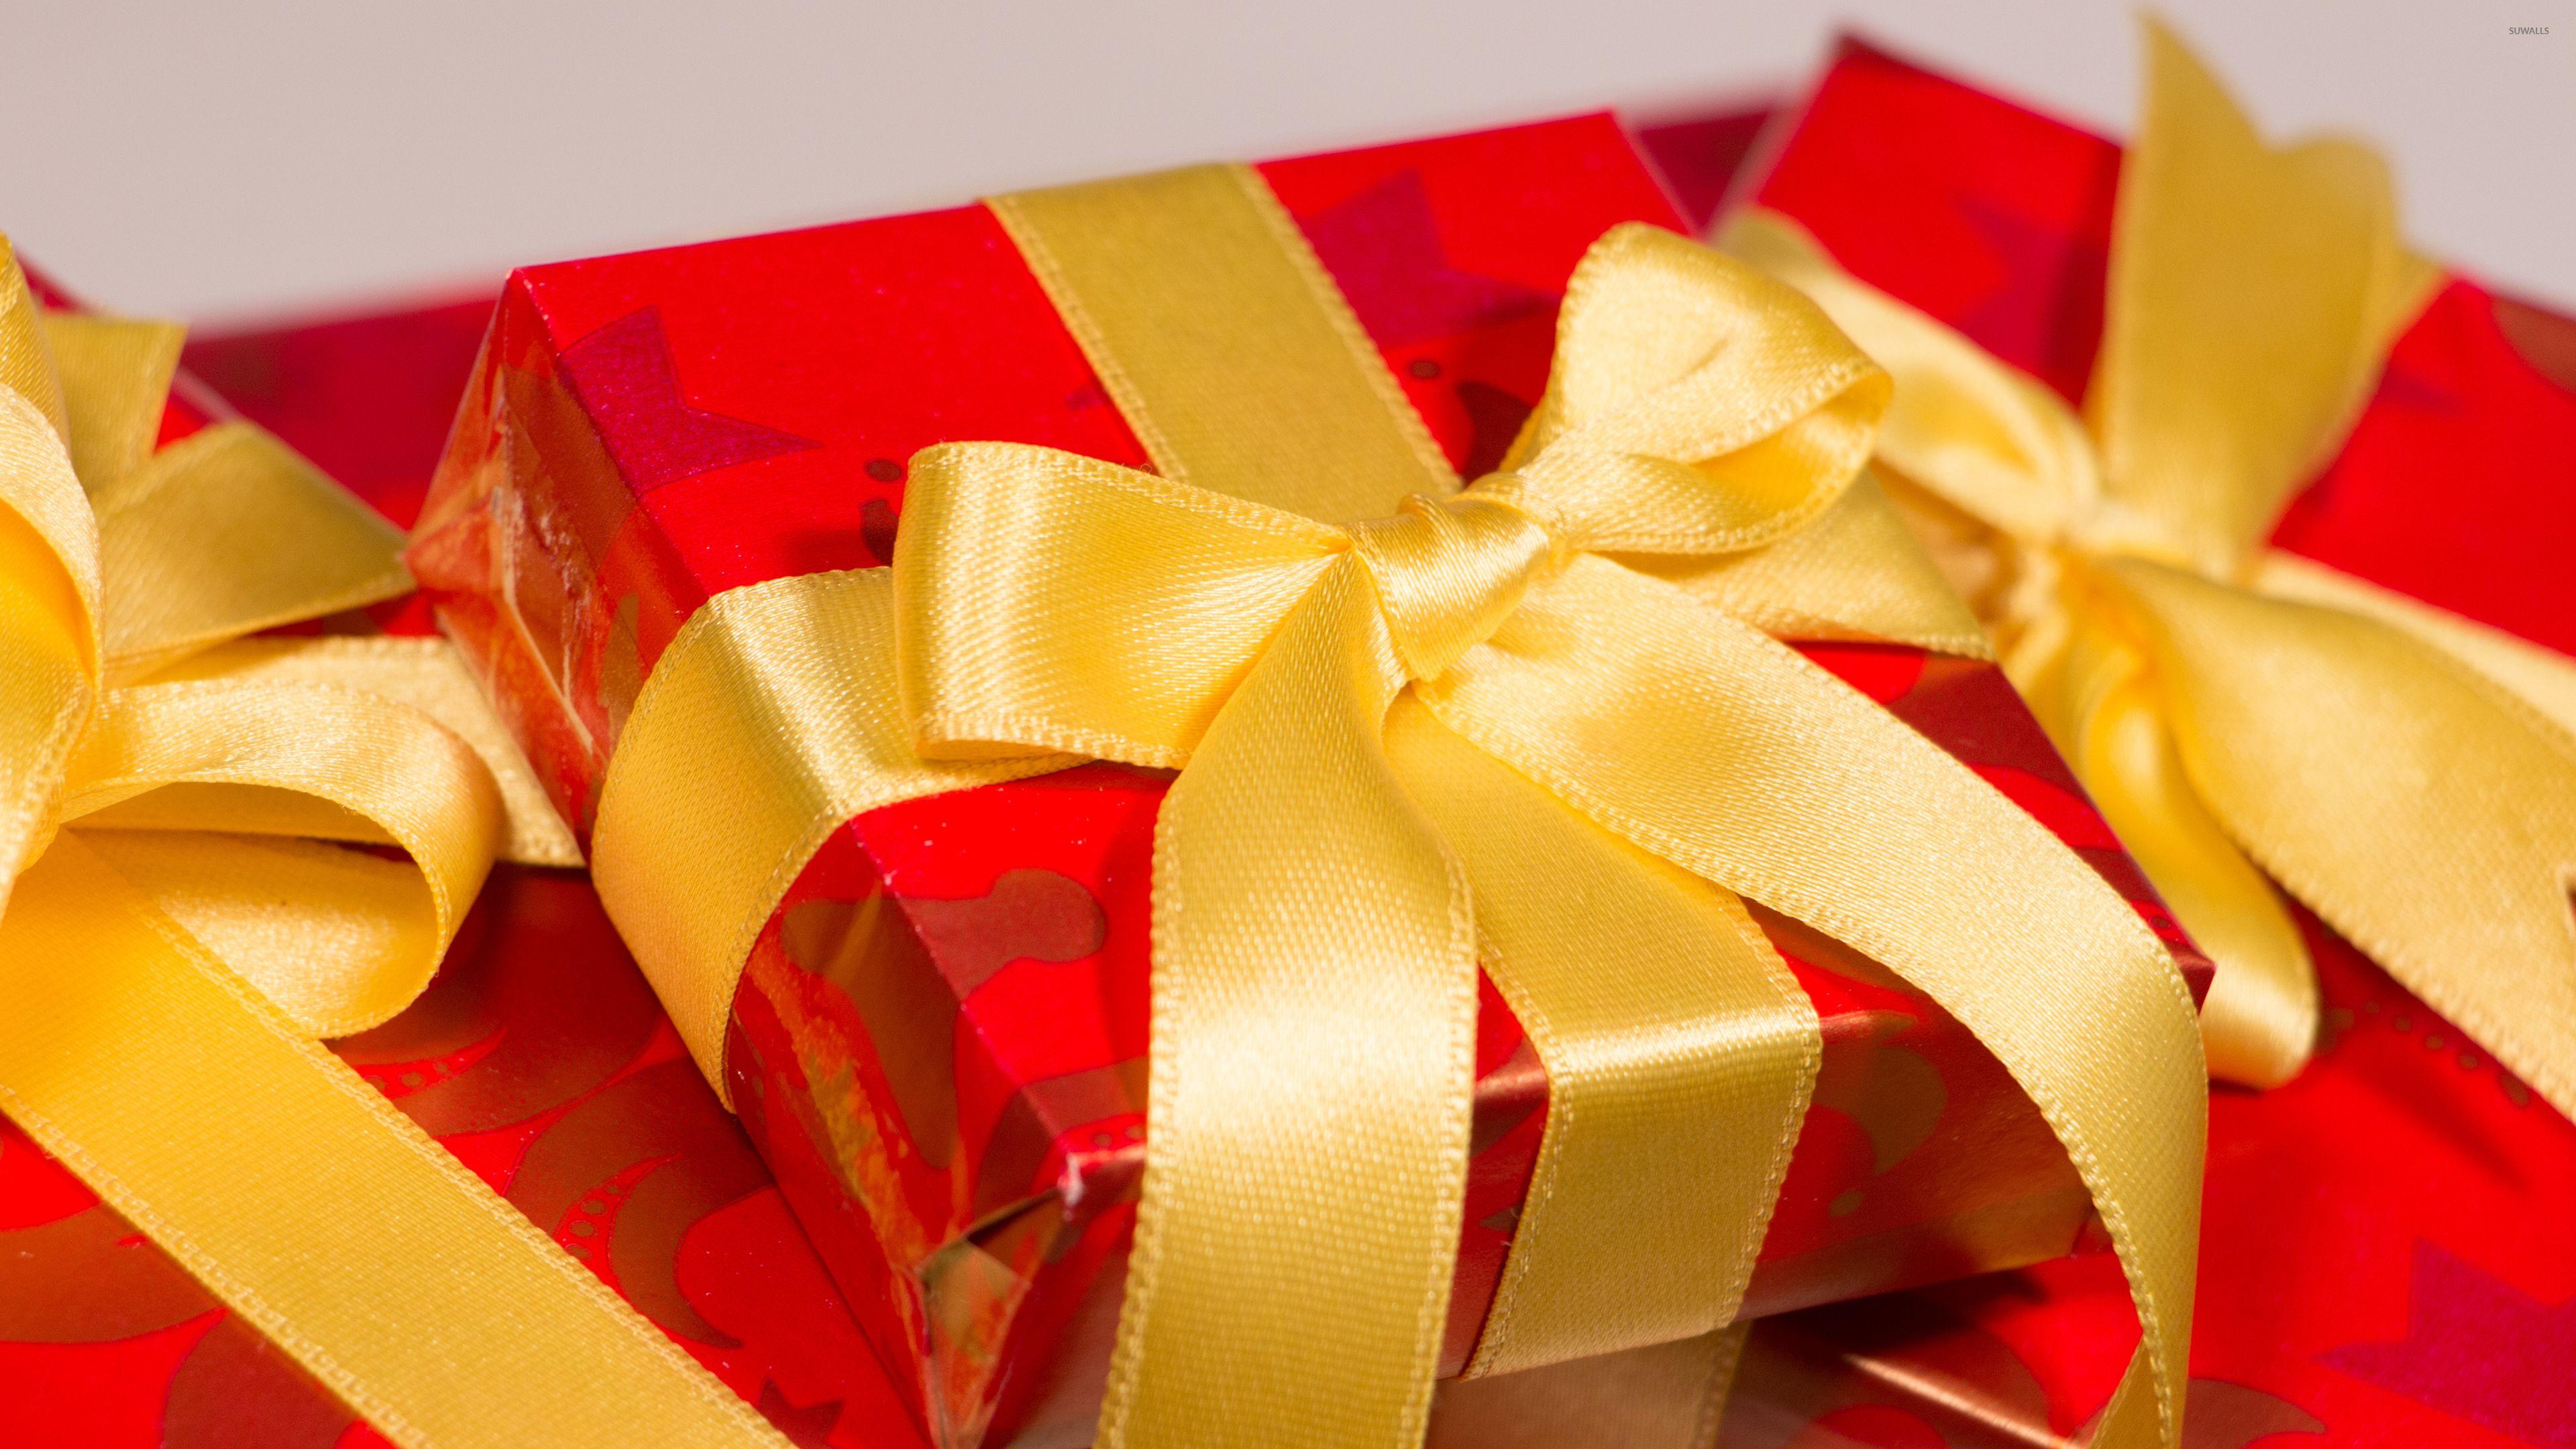 Red presents with golden ribbons wallpaper wallpaper